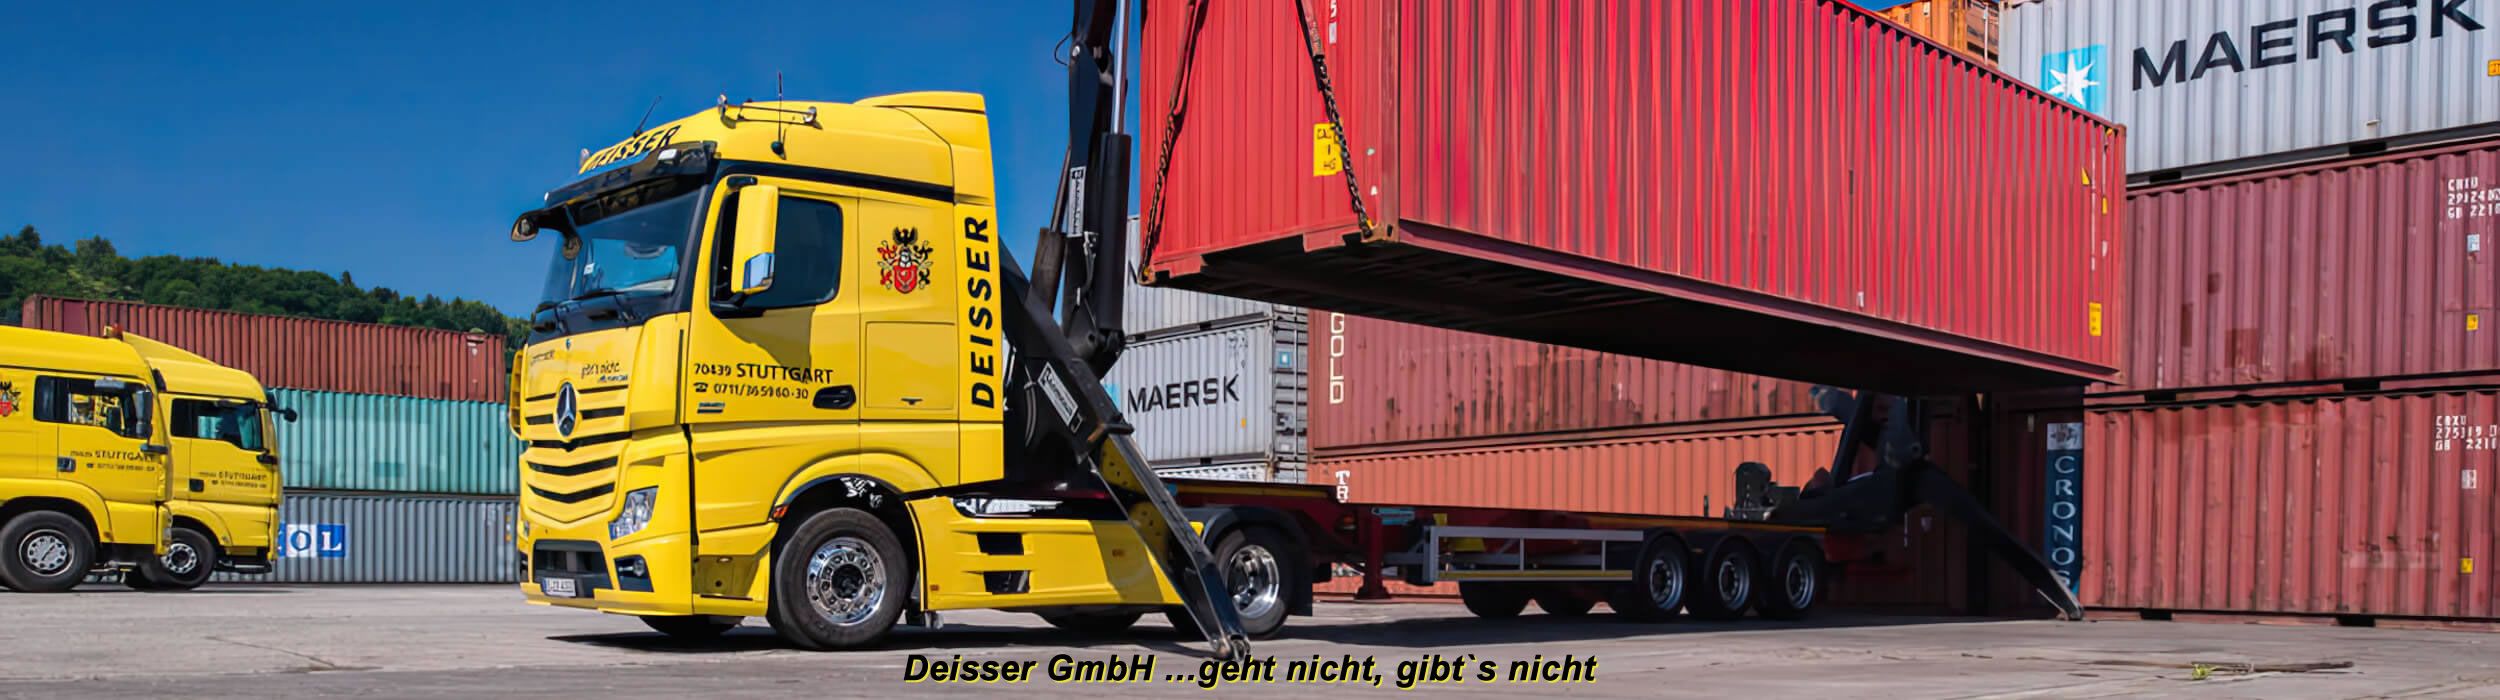 Deisser GmbH / Transportlogistik Seecontainer / Seecontainer